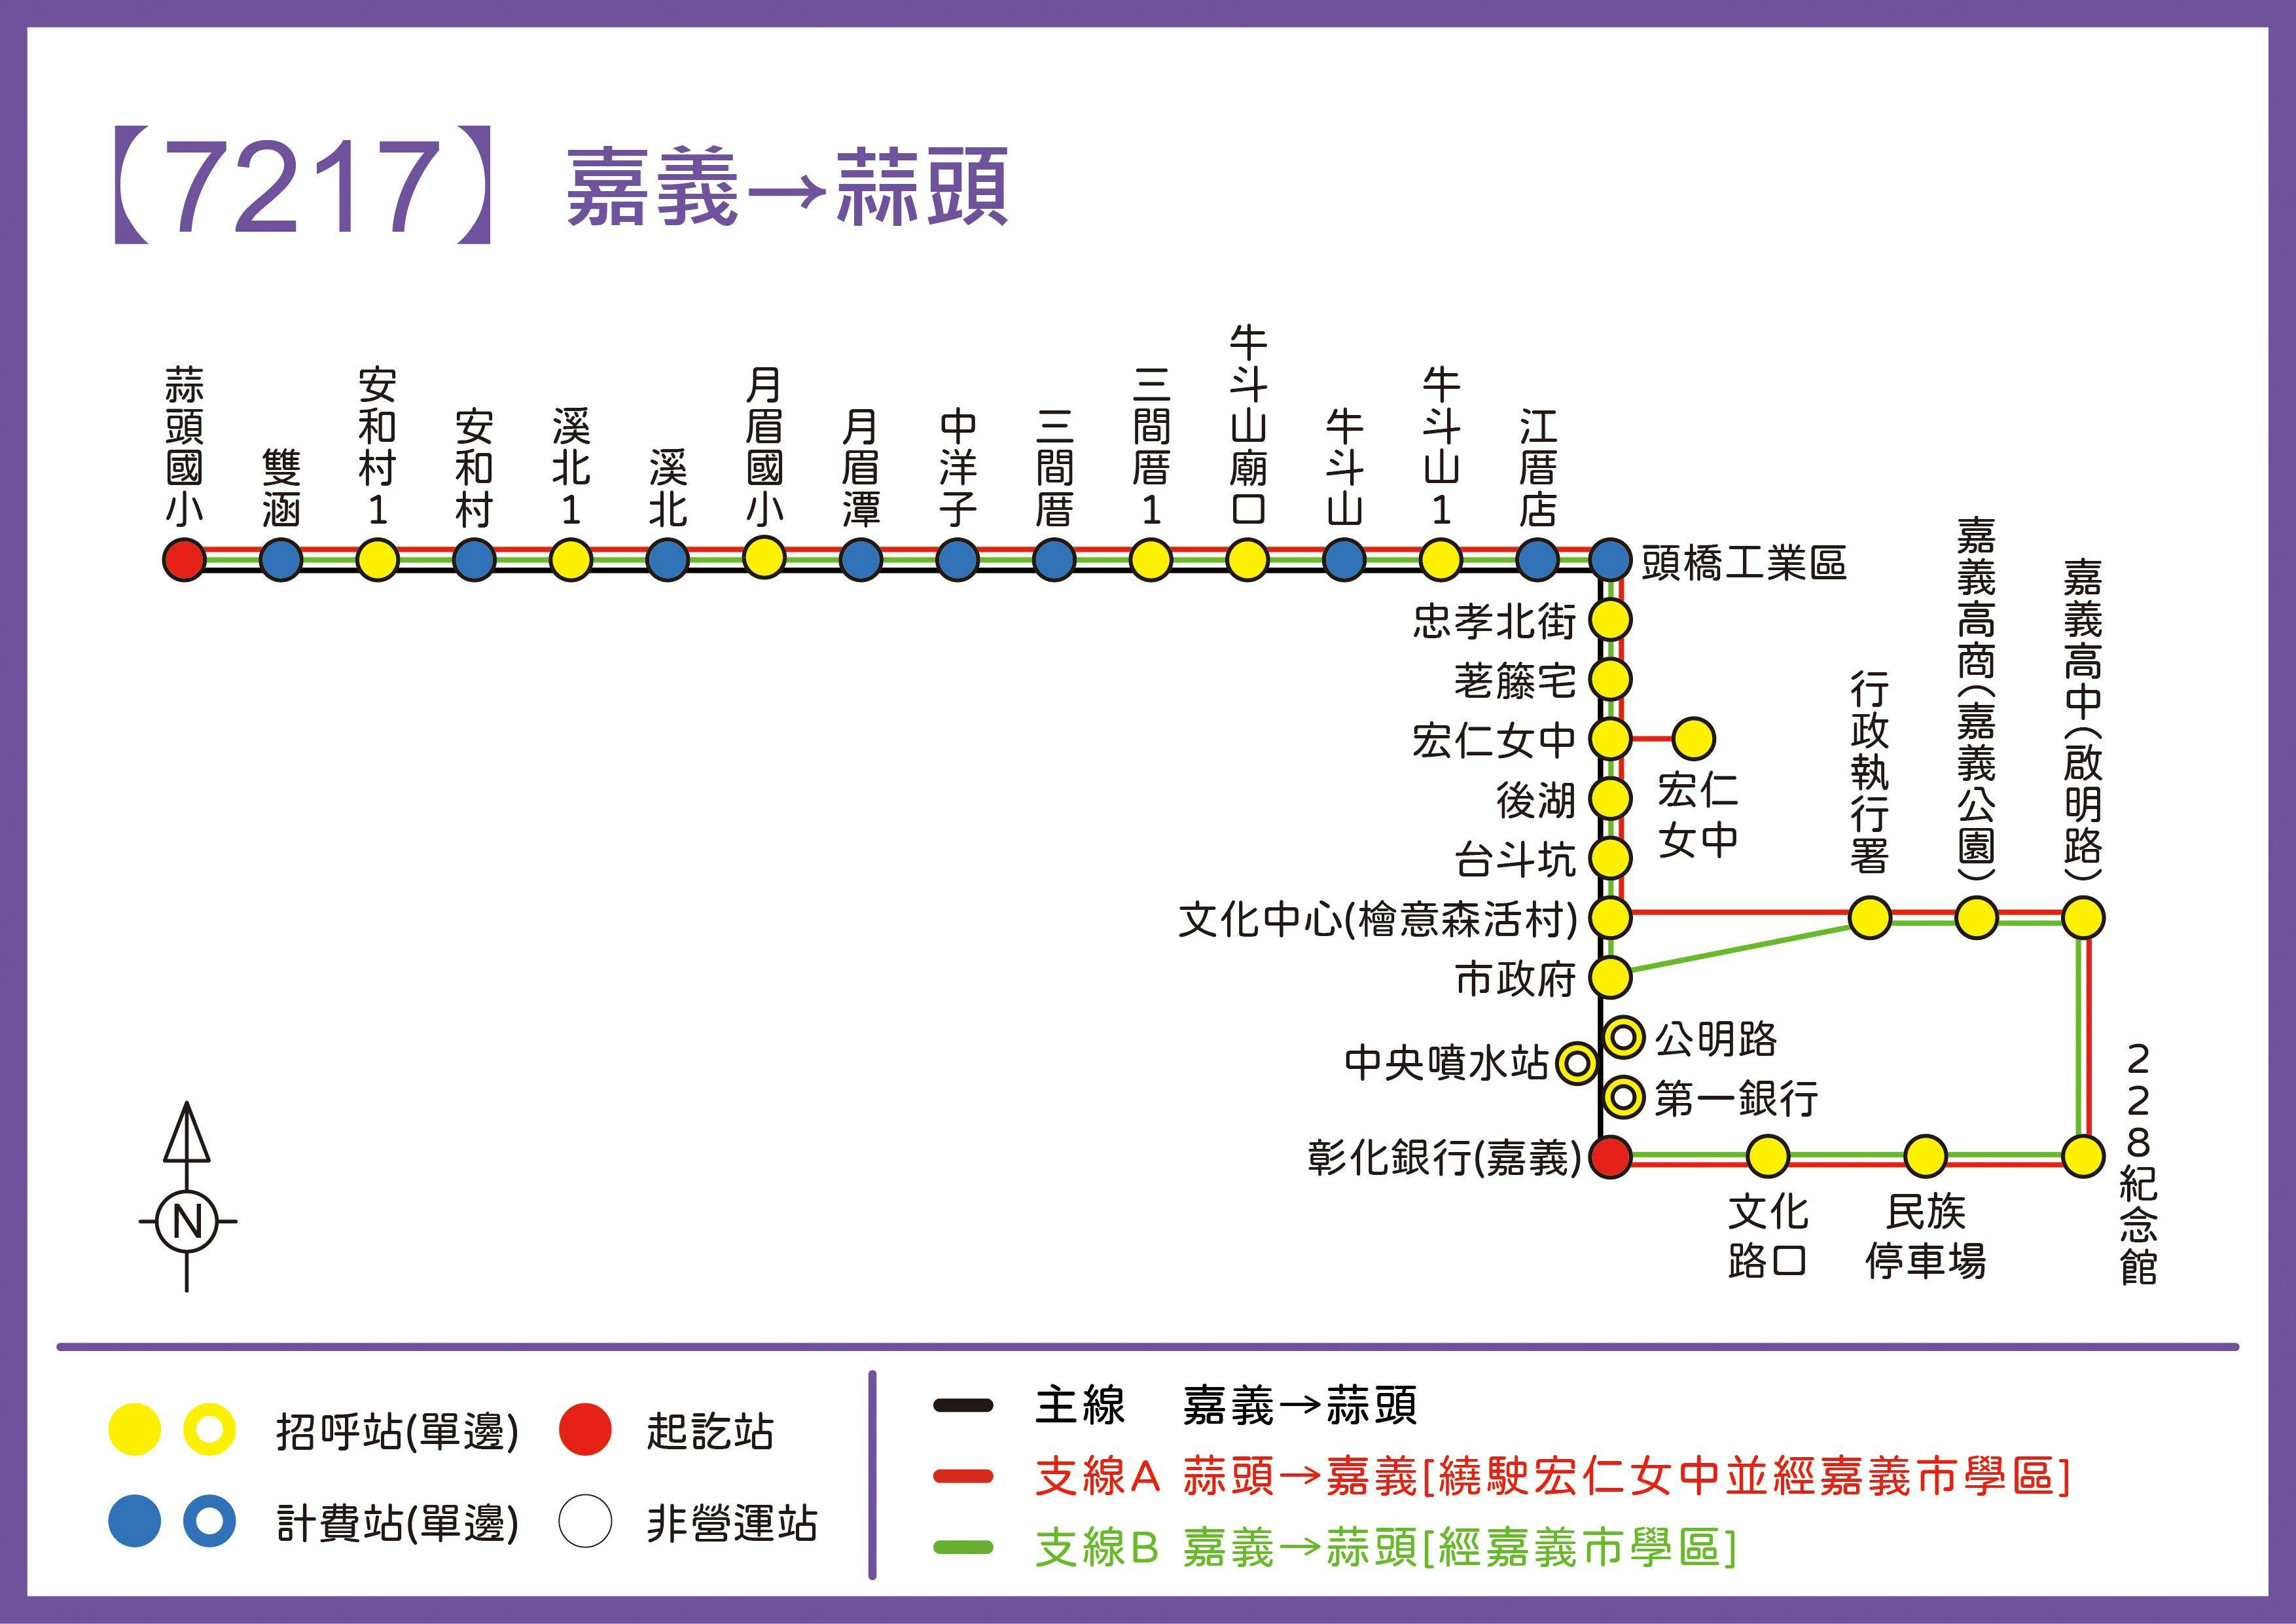 7217Route Map-Chiayi Bus